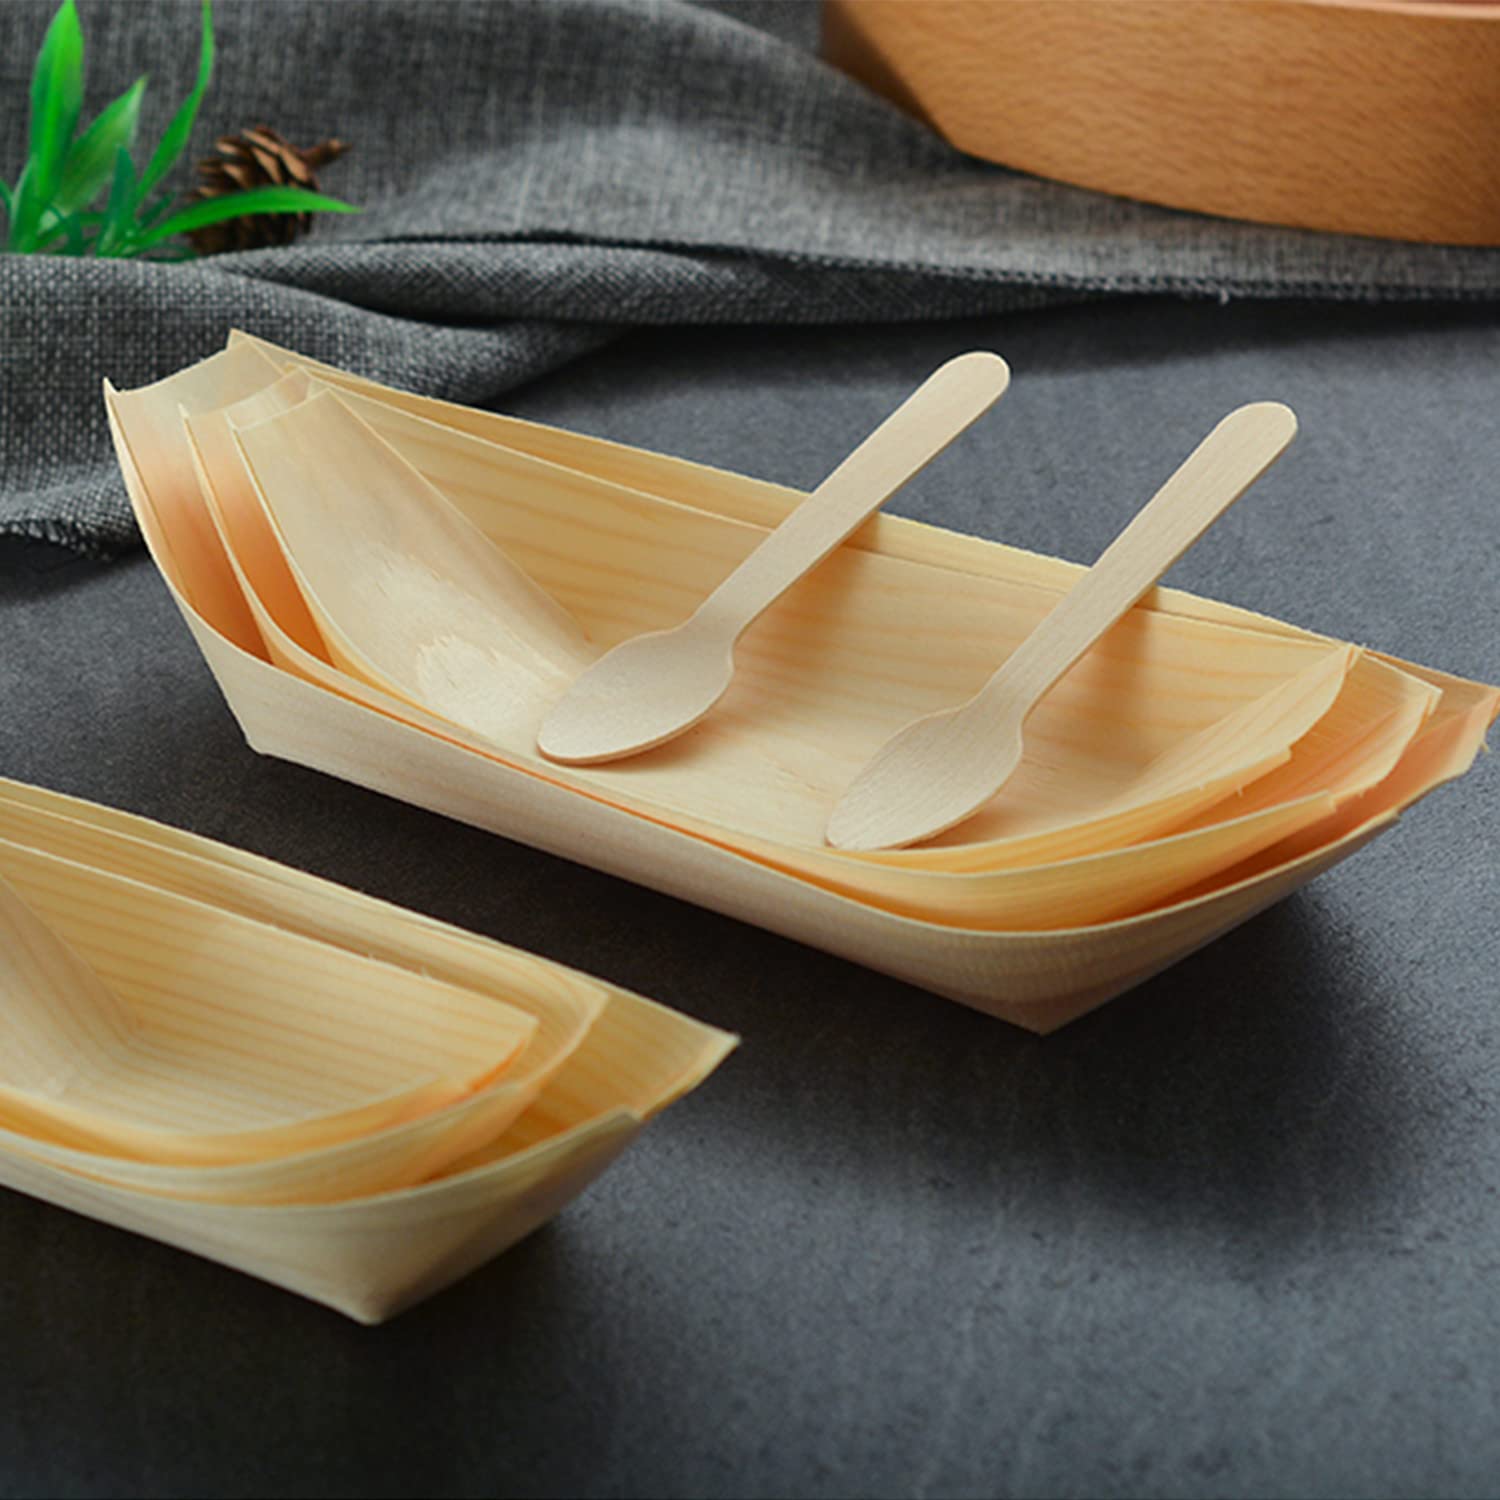 GACATA Natural Disposable Wood Leaf Boats Wooden Serving Boat, For Food Display Convenient Plates Dishes Take Out Trays Party Home Dinner (8 inch 100pcs)